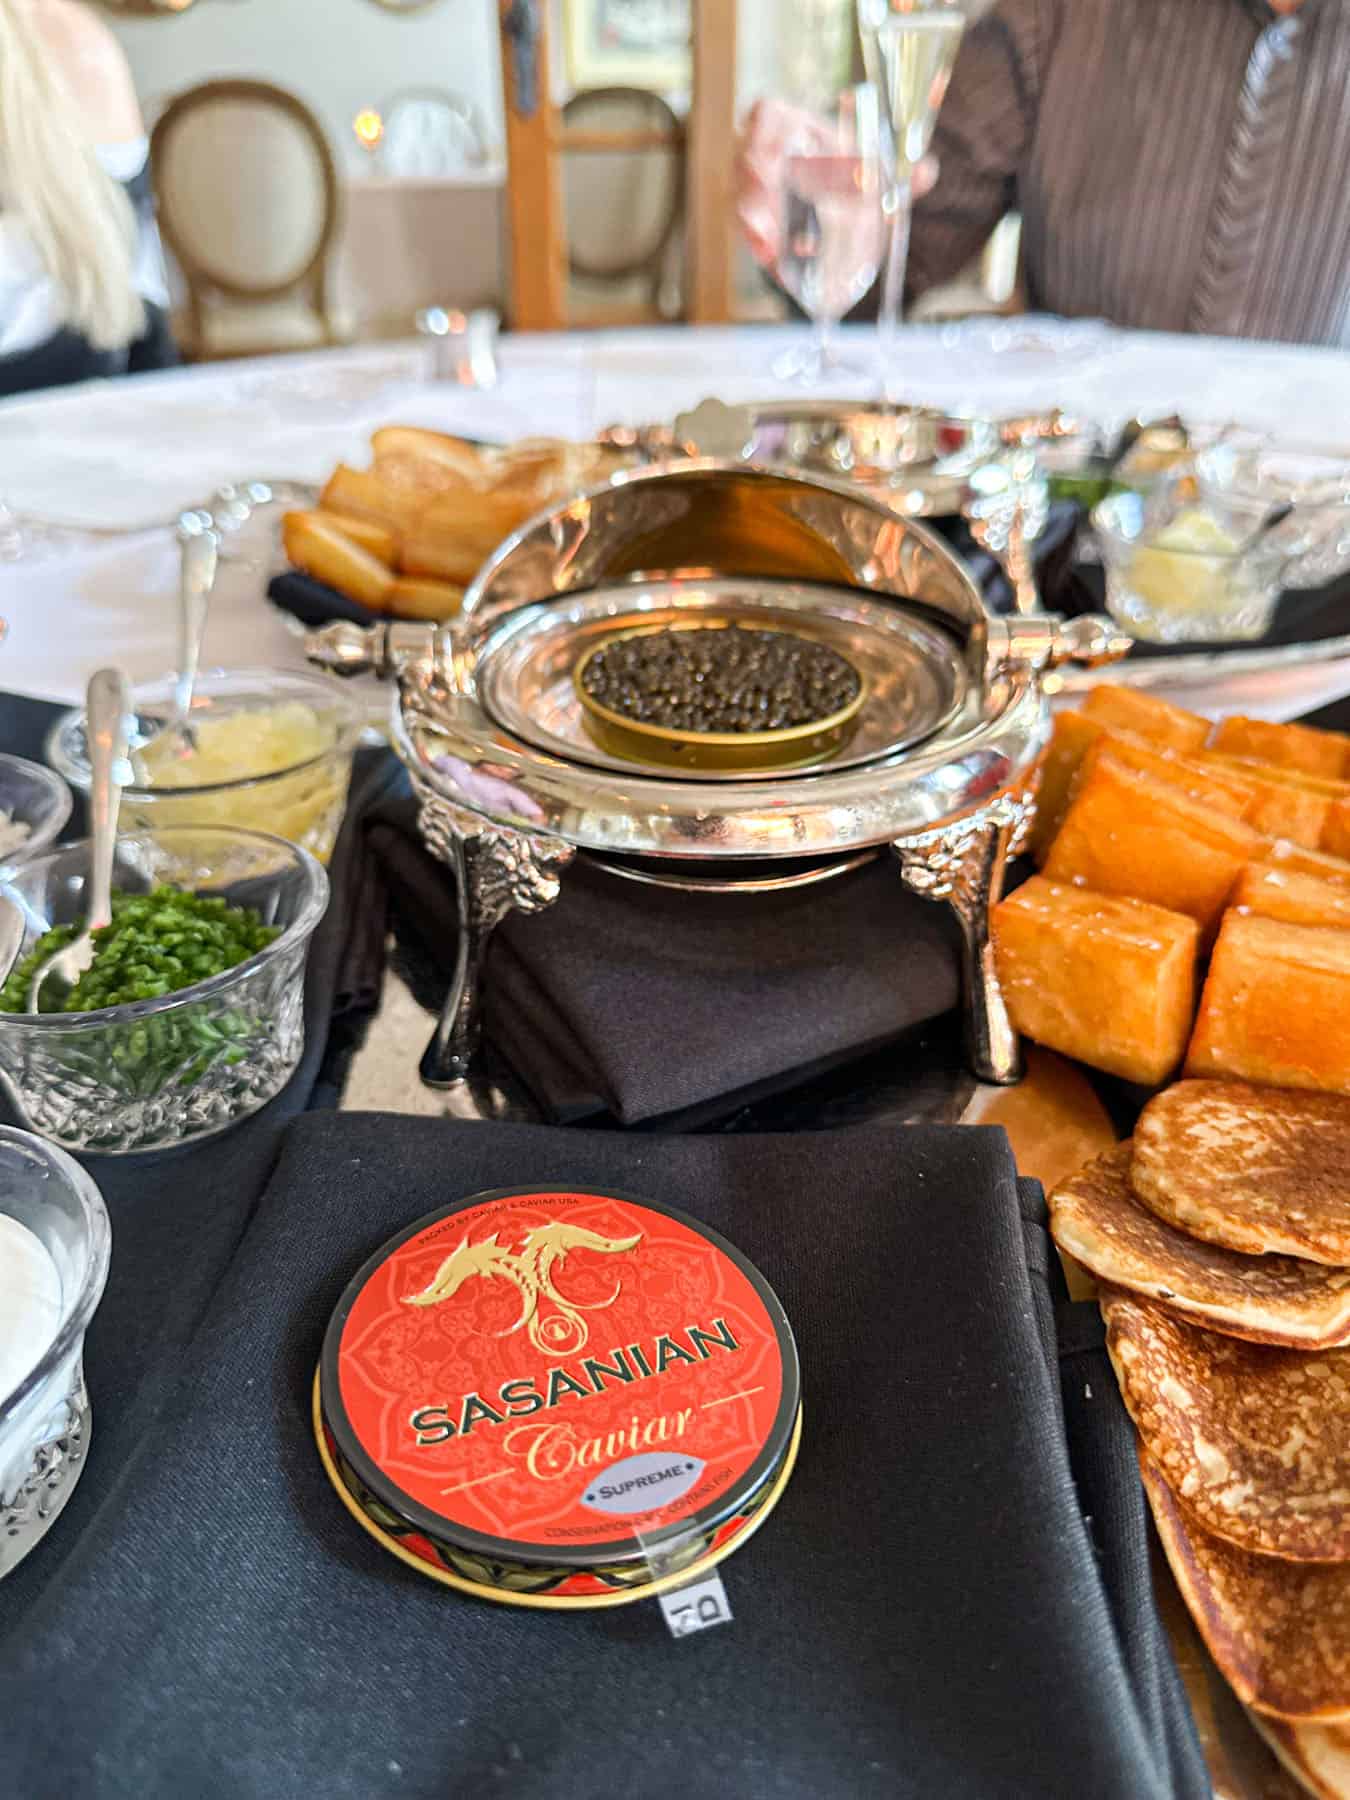 an opened jar of caviar and side dishes on a white table at Cafe Monarch in Scottsdale AZ.